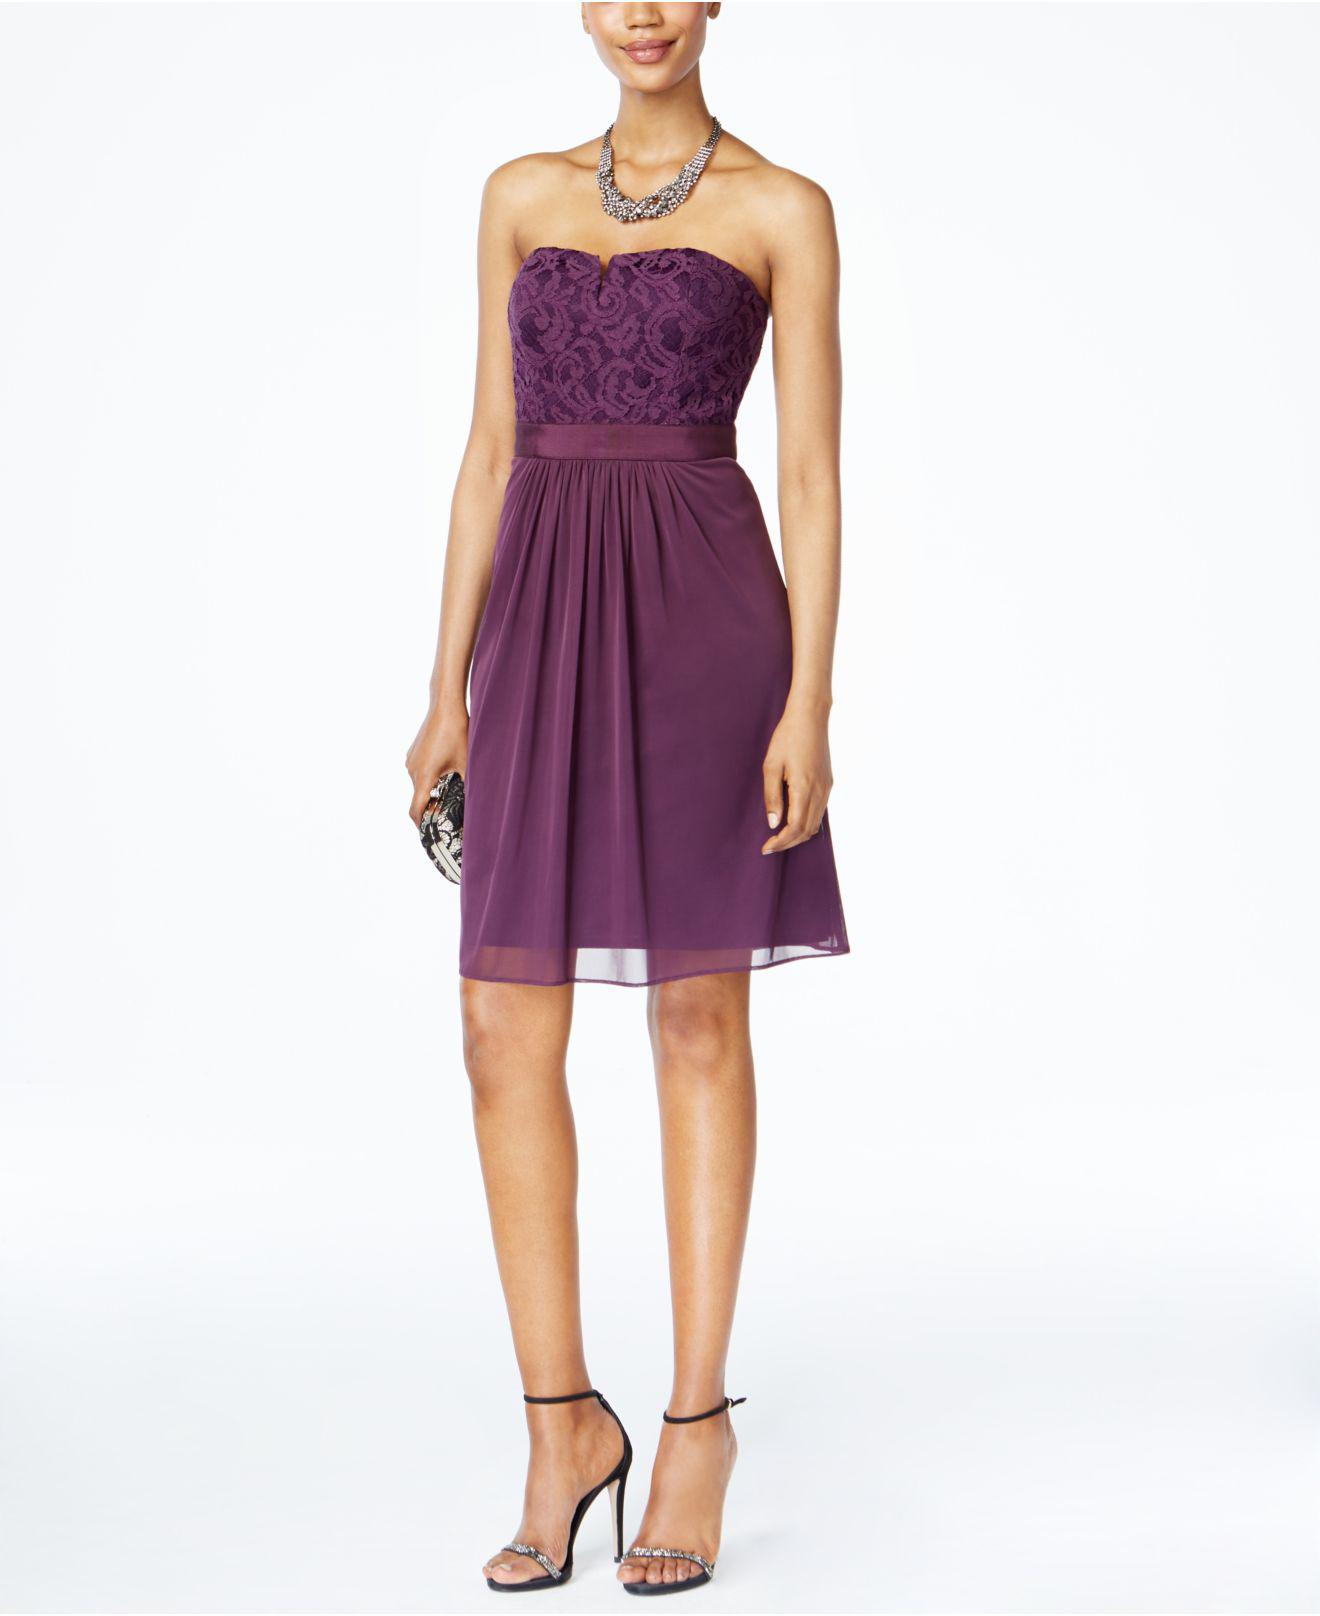 Adrianna Papell Strapless Lace & Tulle Dress in Purple - Lyst